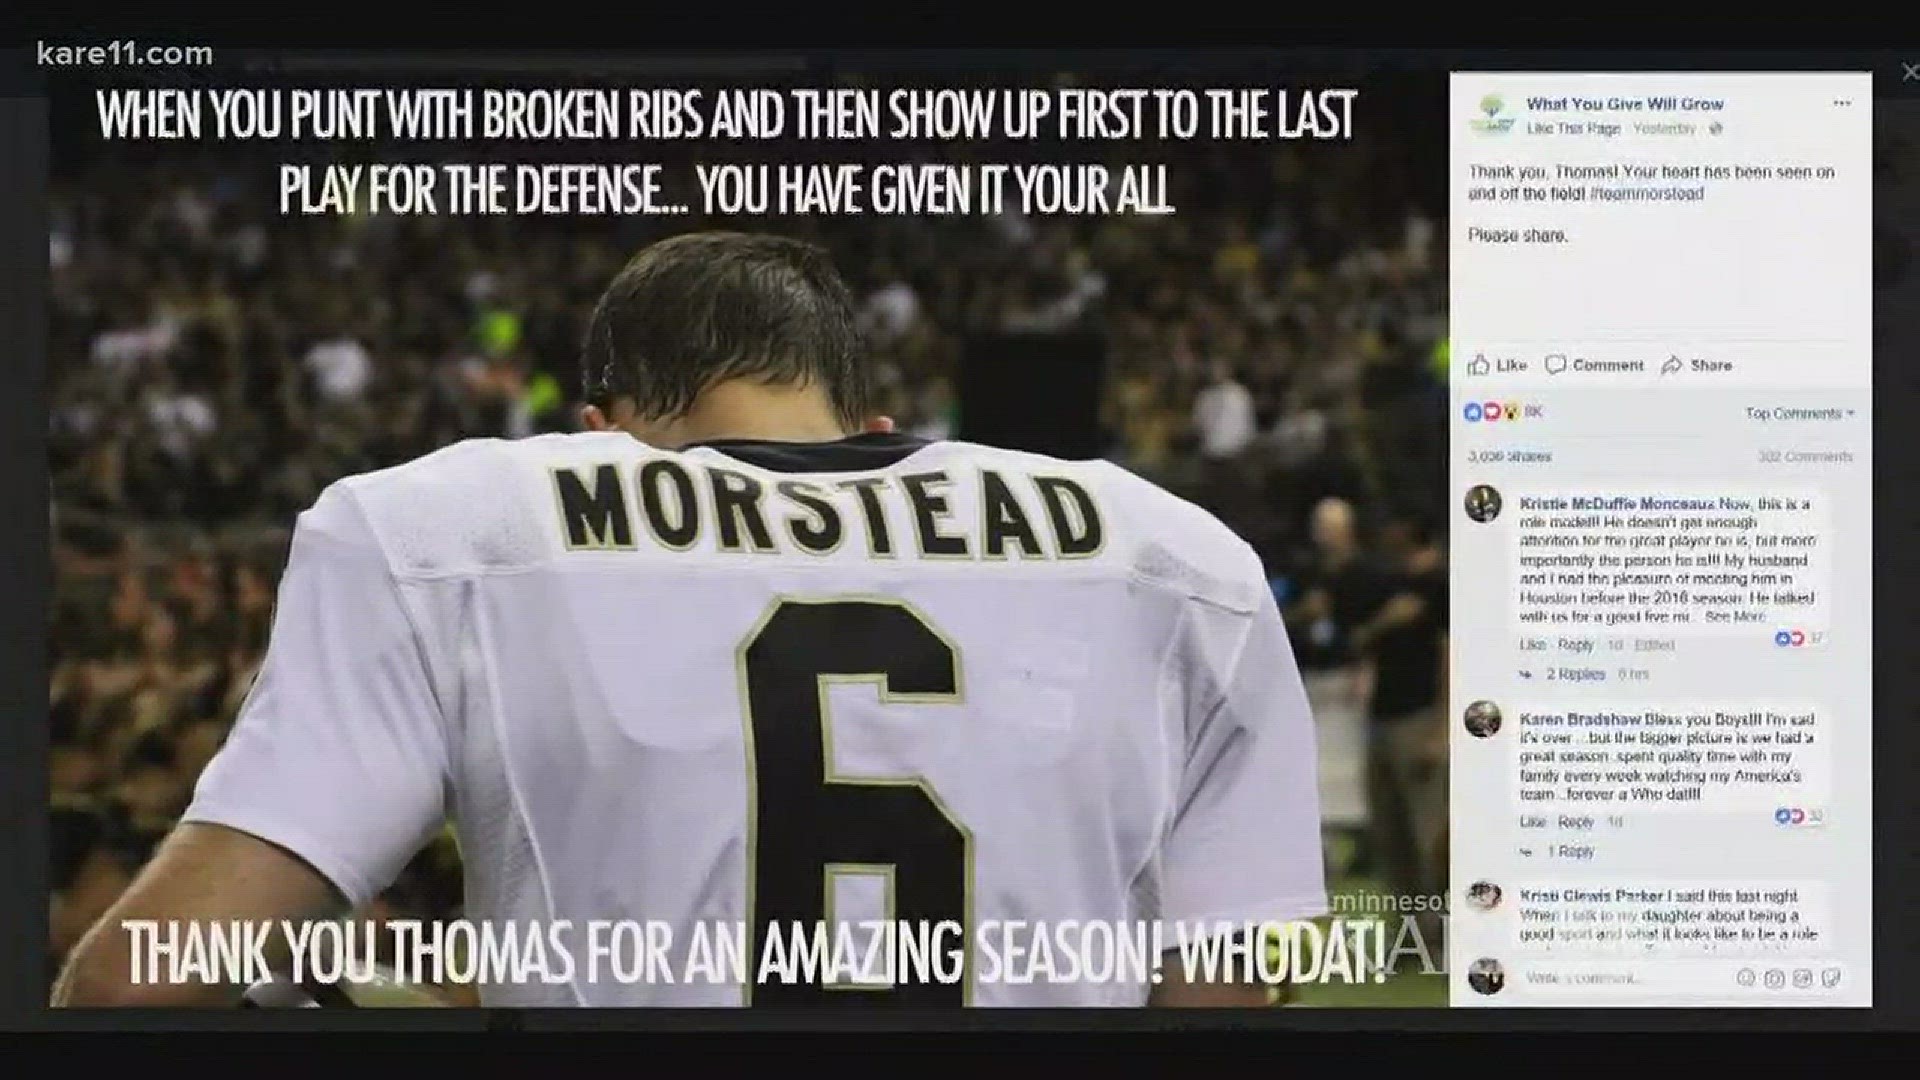 Saints punter Thomas Morstead, injured early on, was the epitome of sportsmanship at the end of the game. Lindsey Seavert shows us how his actions are helping others in Minnesota.